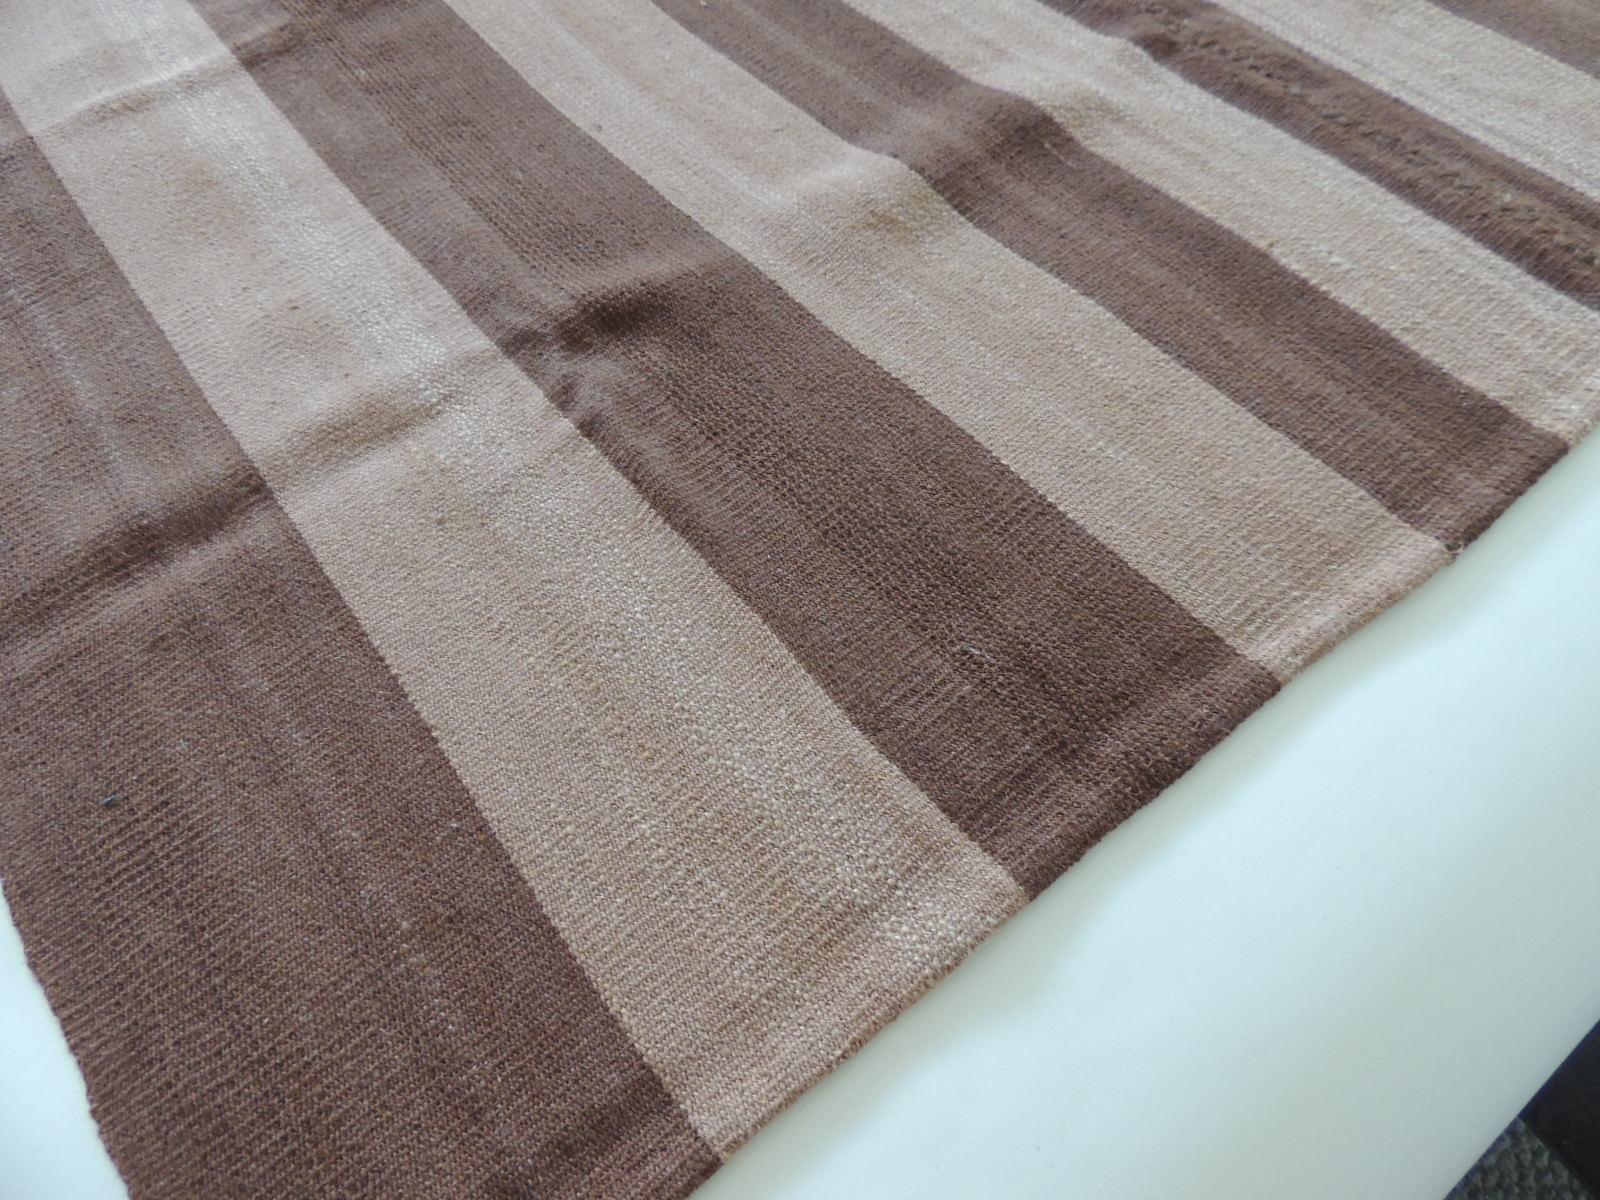 Argentine Vintage Brown and Camel Woven Textile For Sale